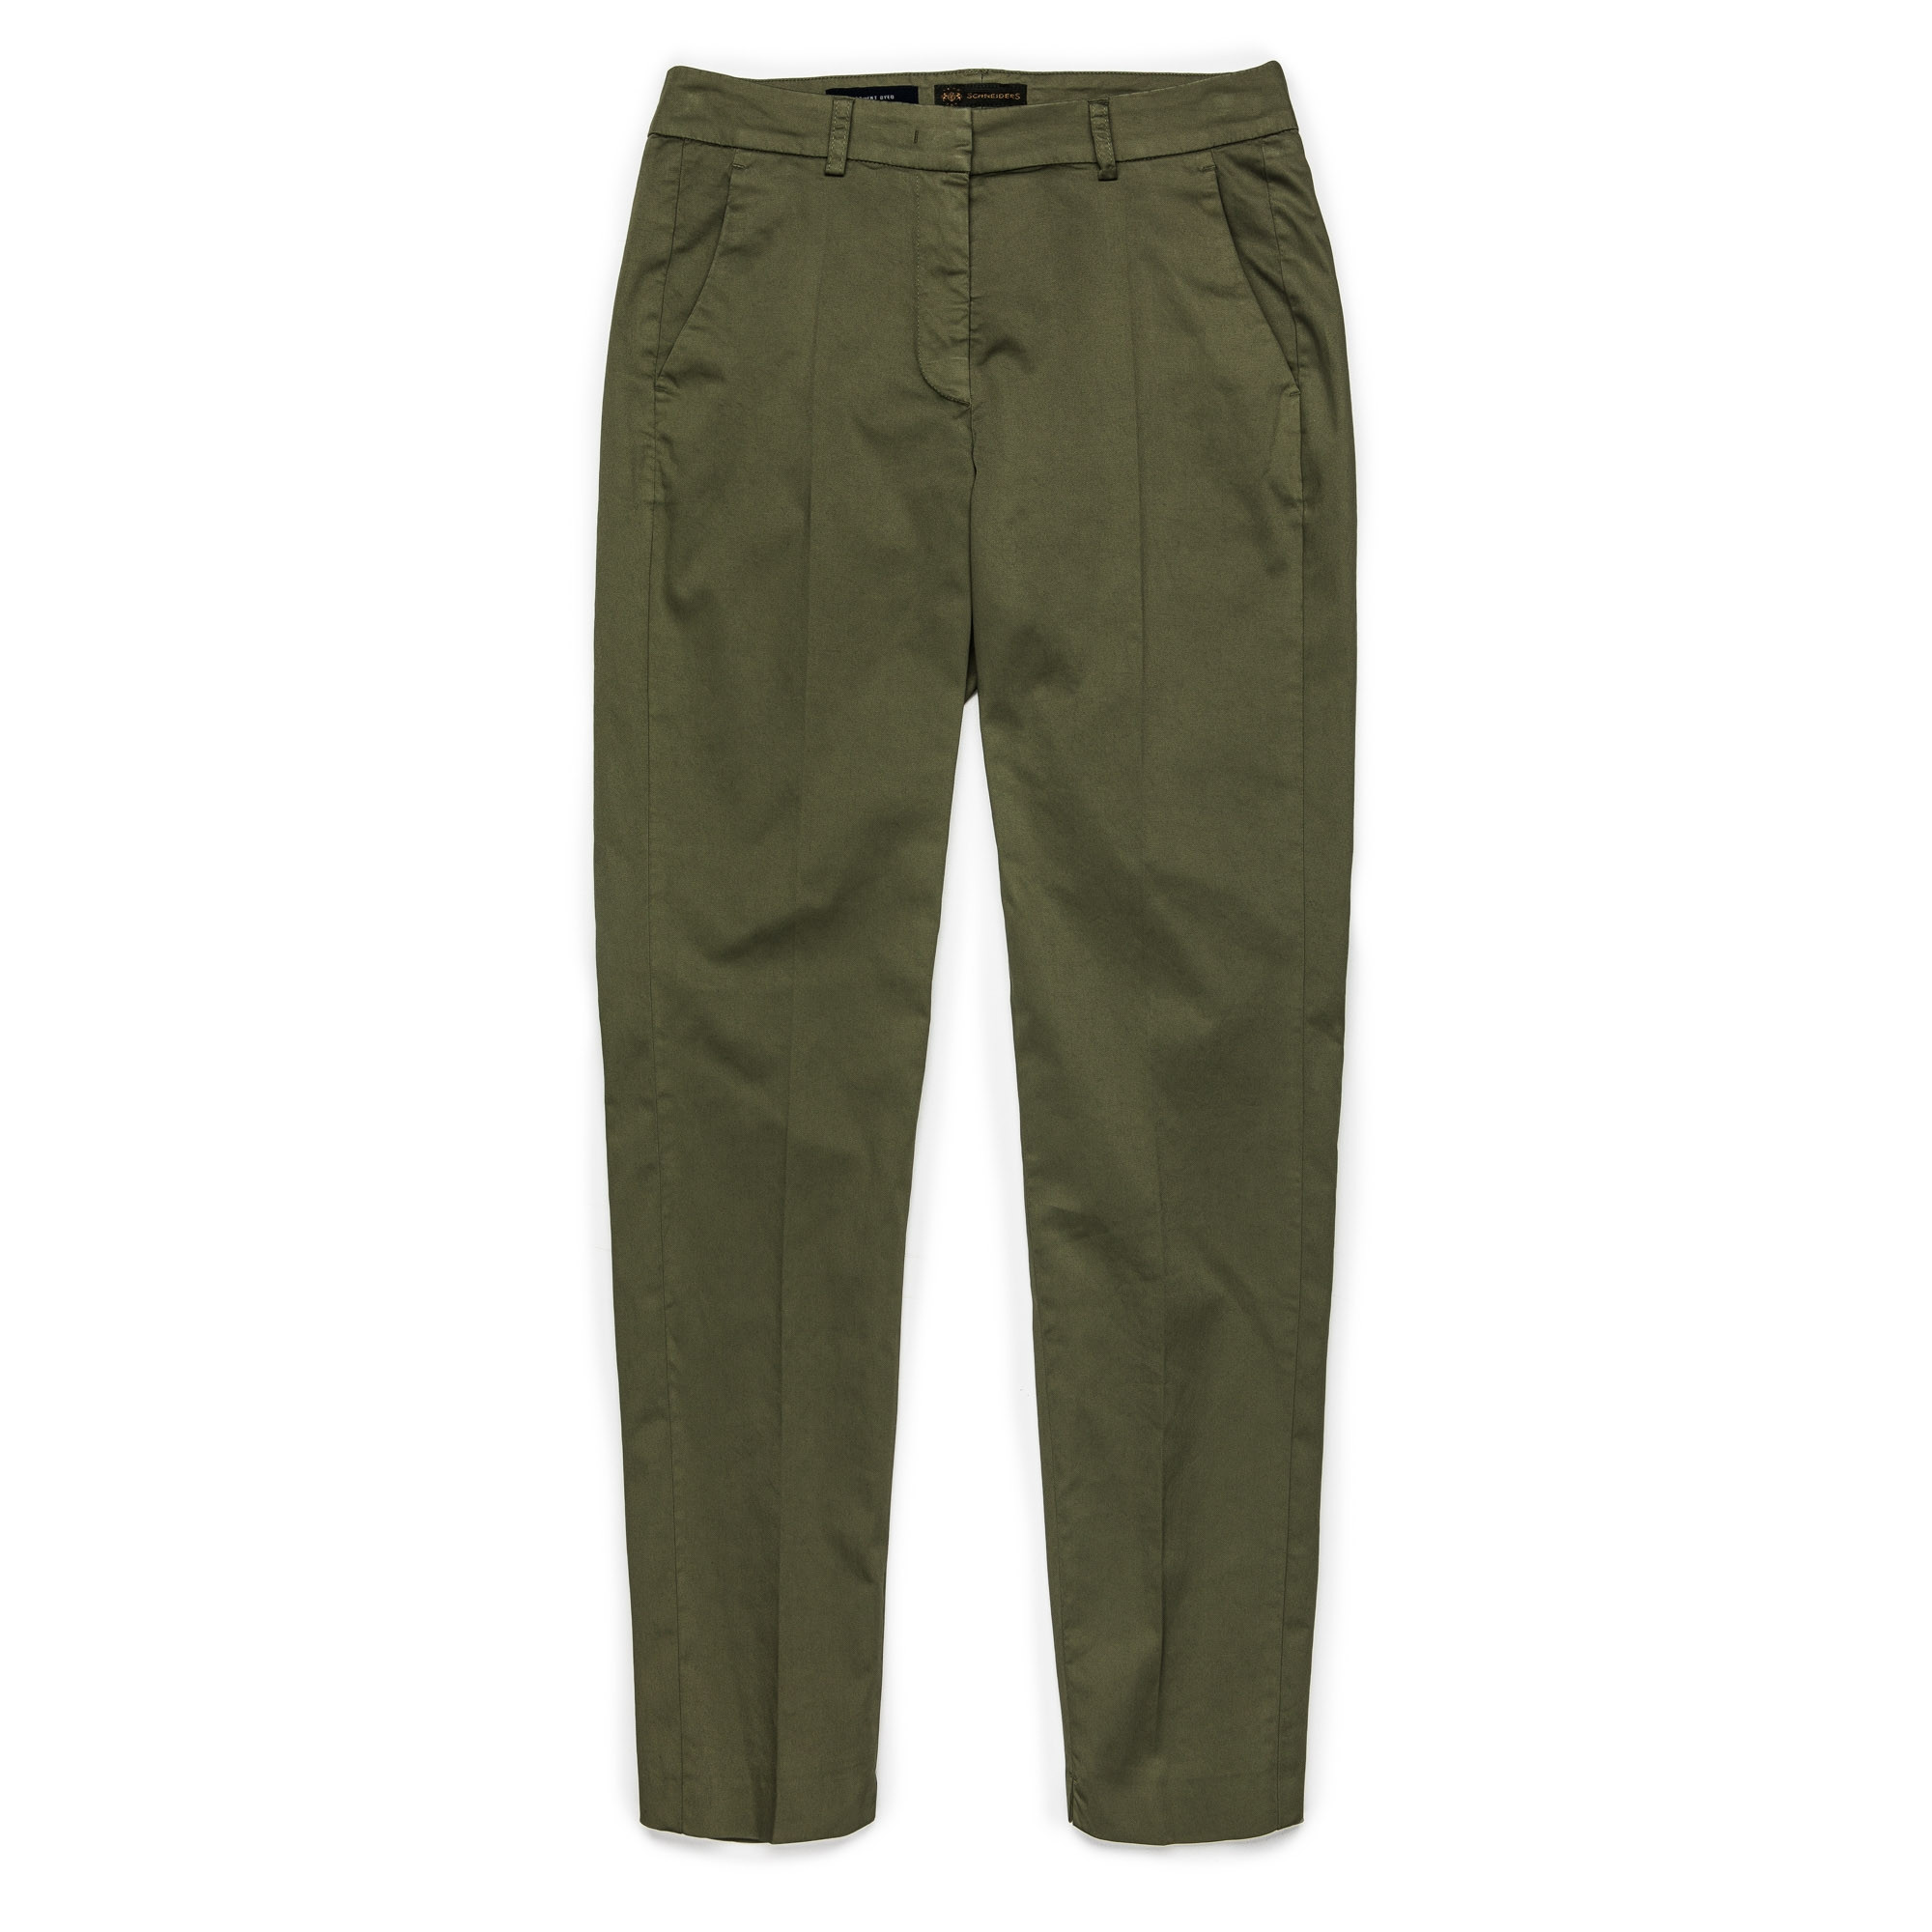 Schneiders - Ladies Paolina Trousers in Olive